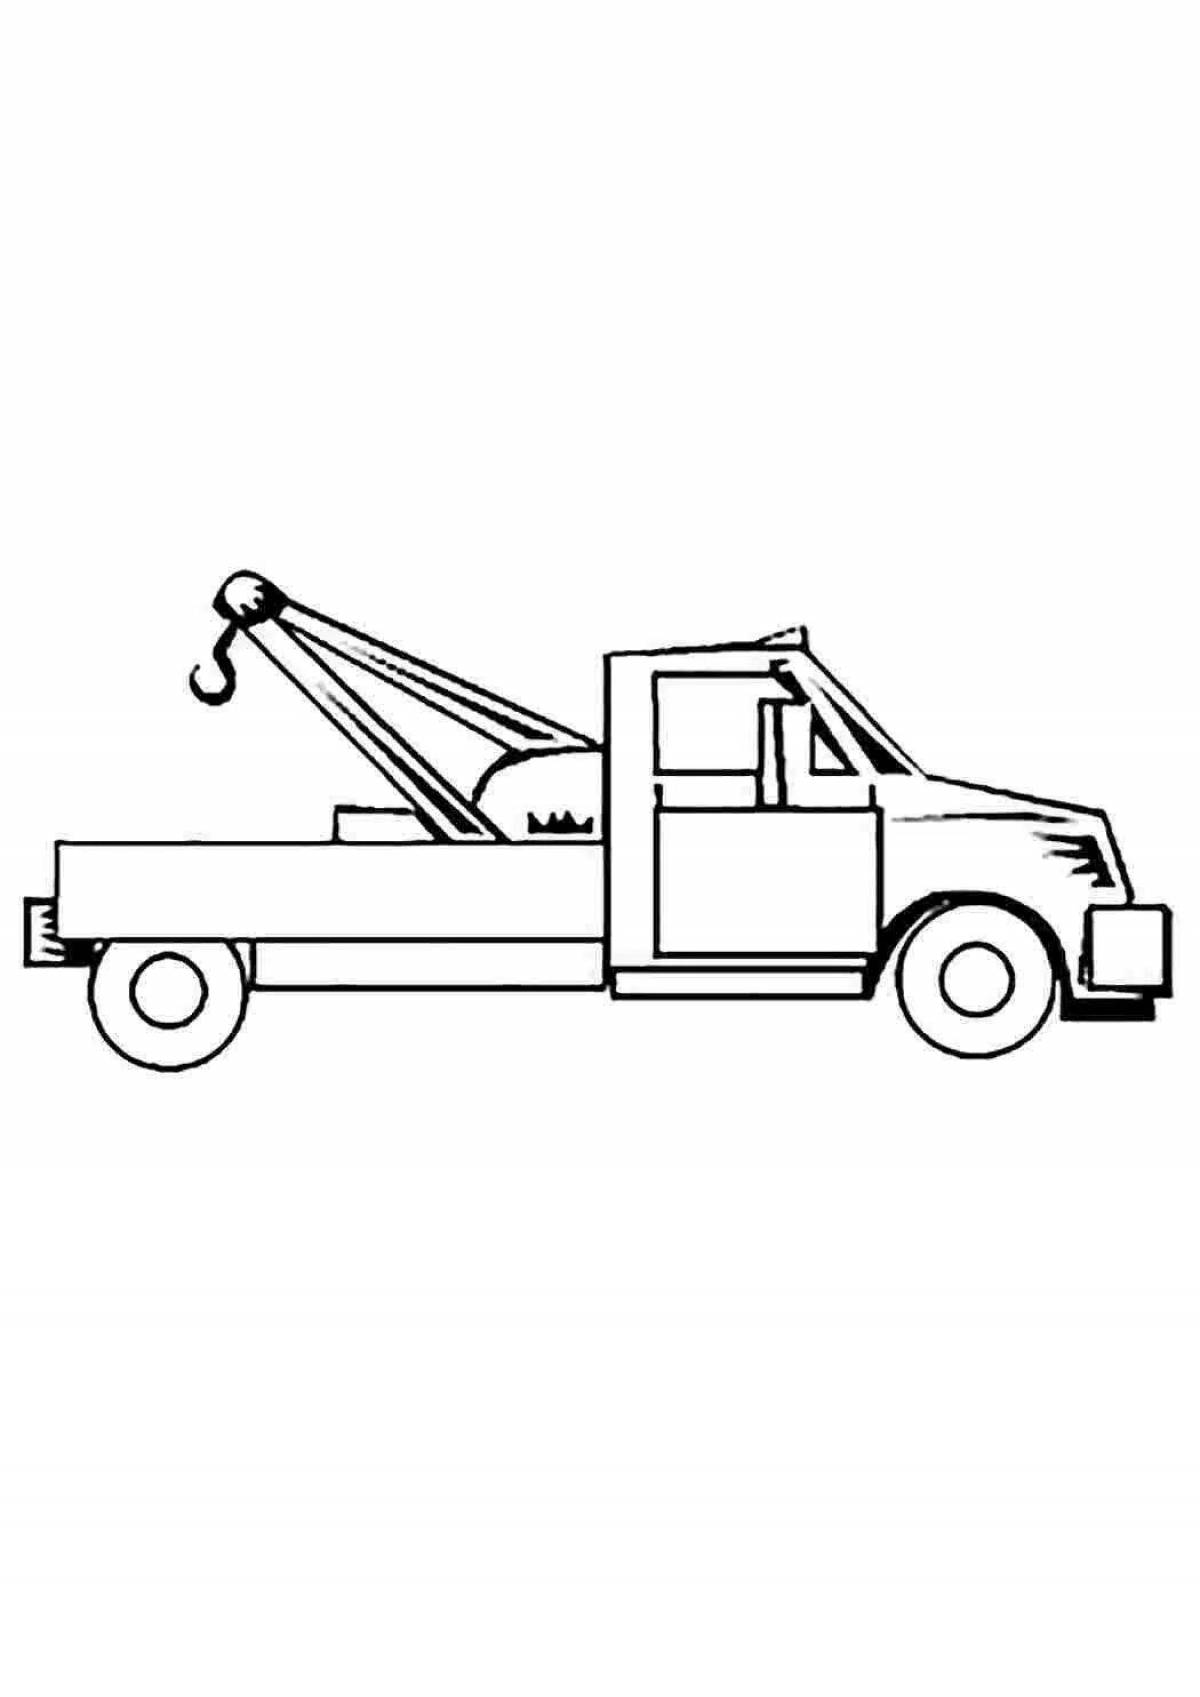 Artistic tow truck coloring page